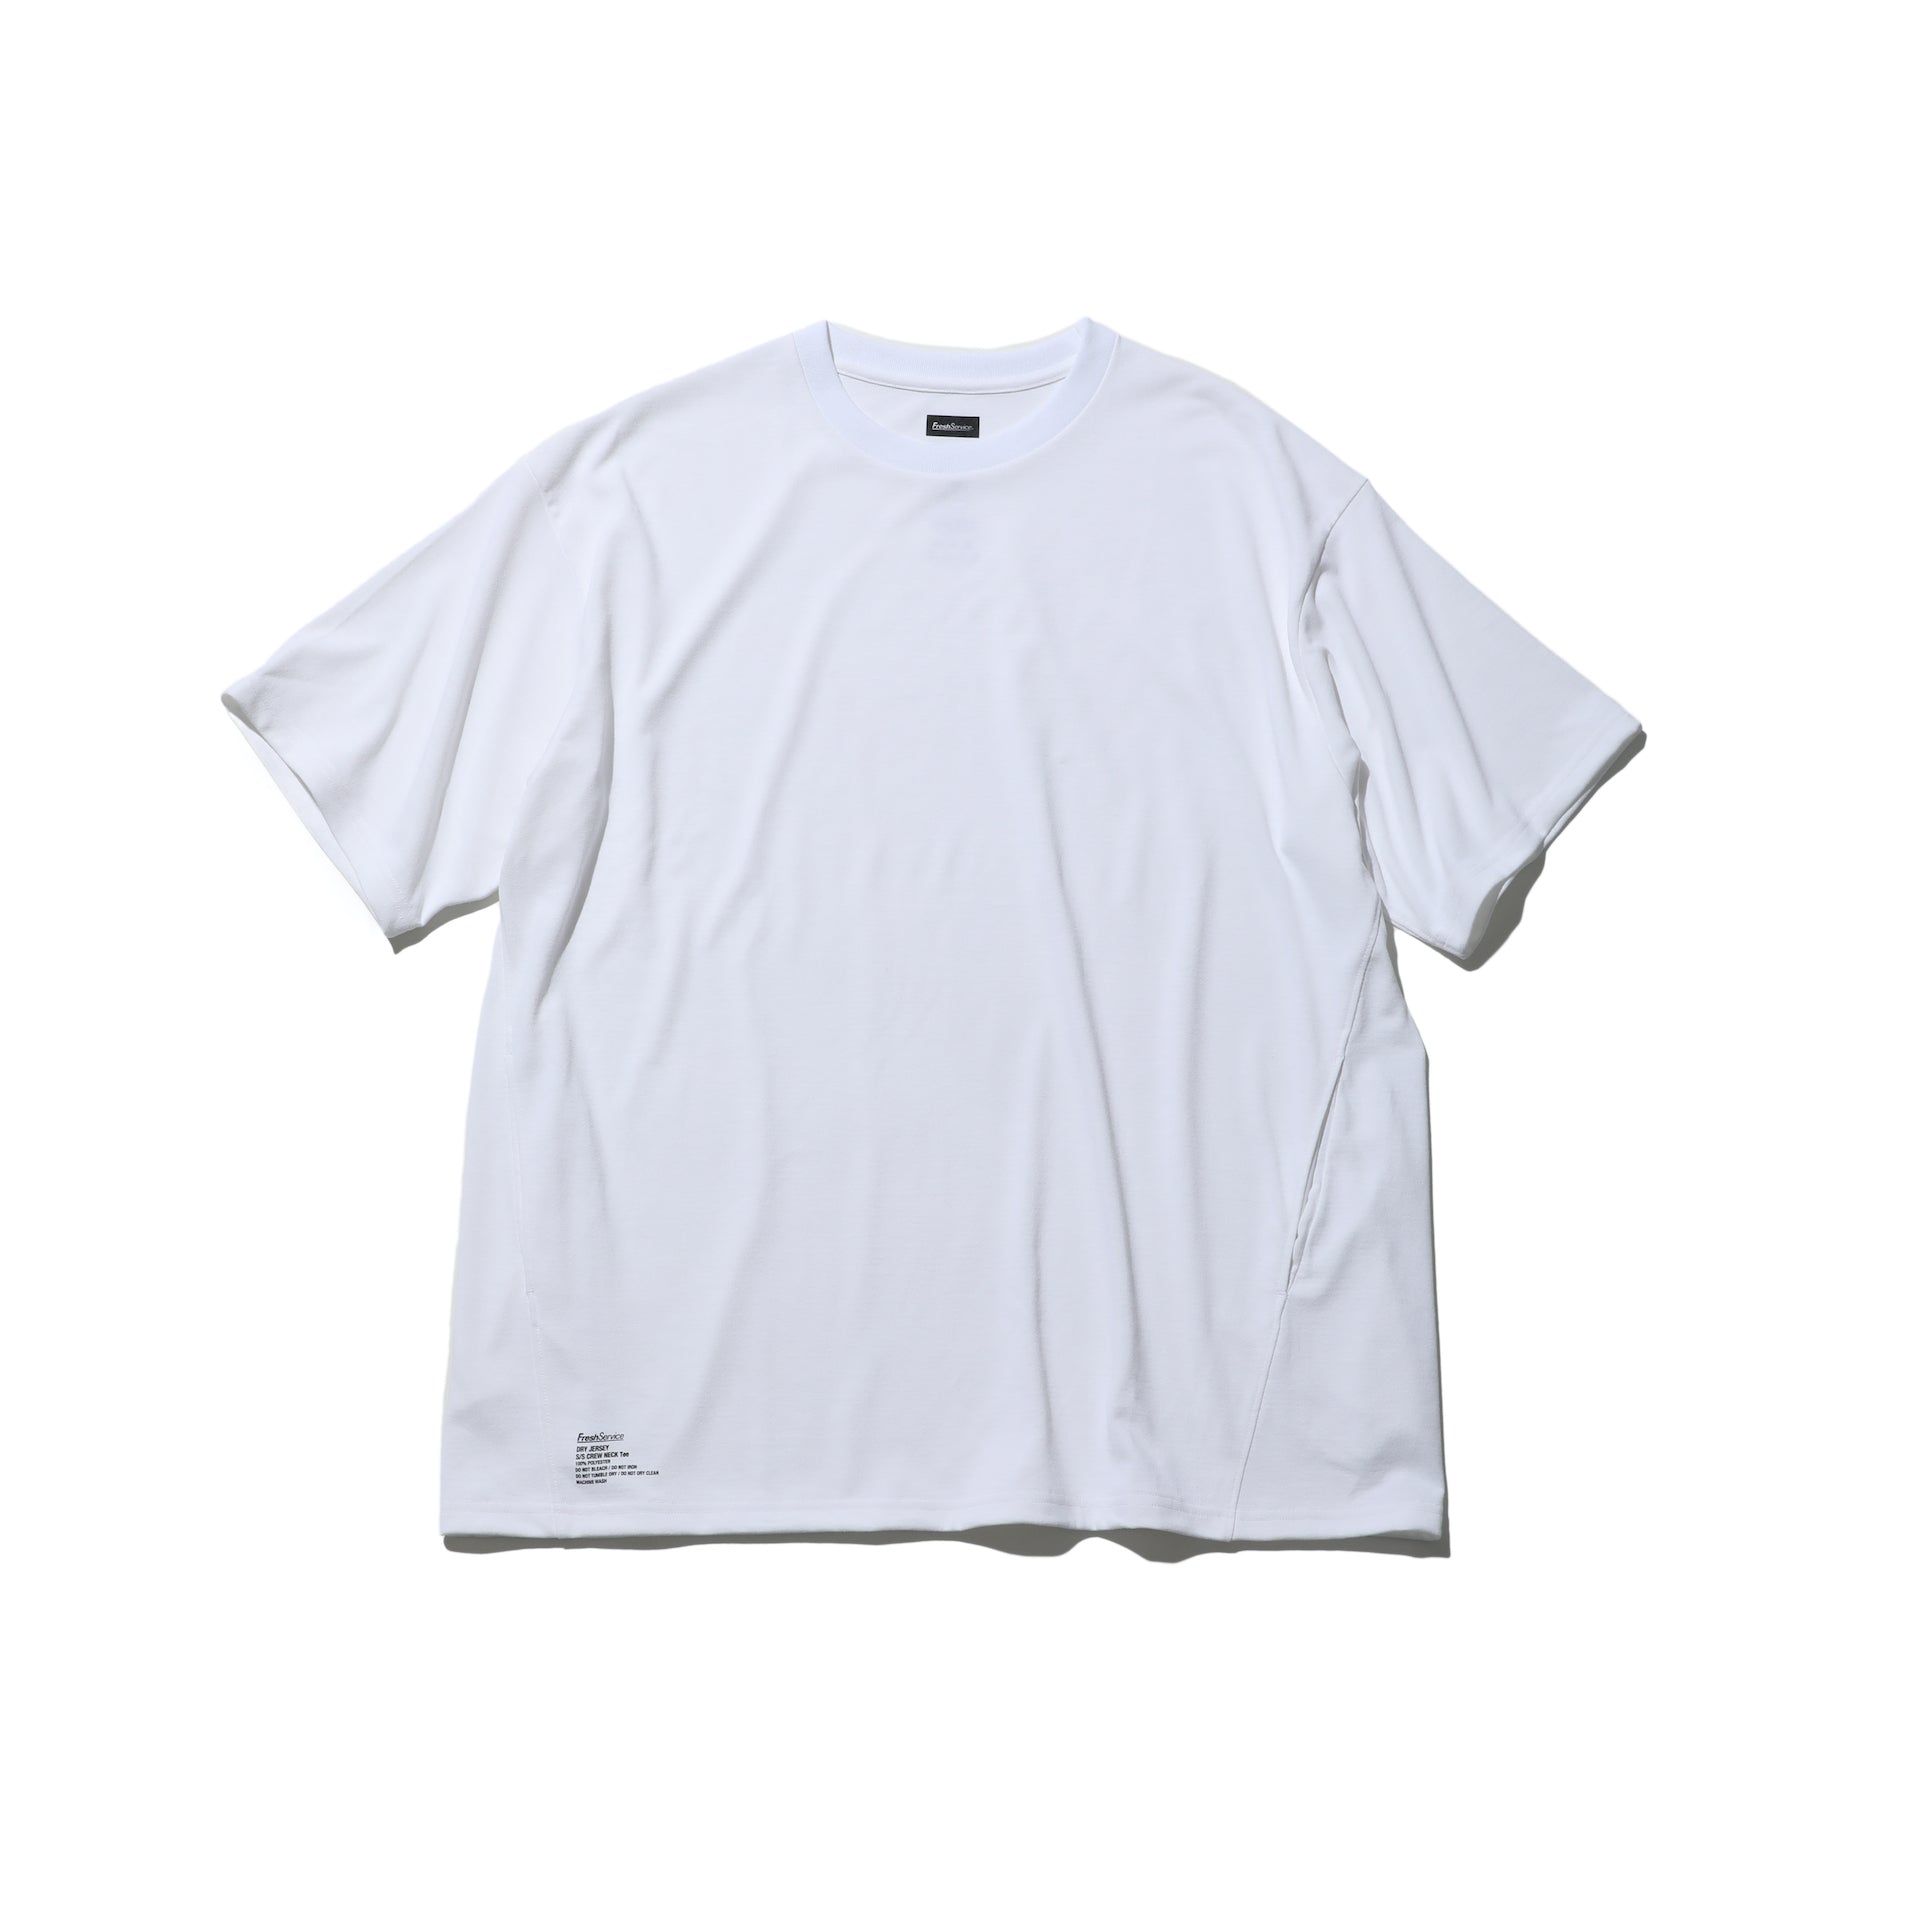 DRY JERSEY S/S CREW NECK TEE – FreshService® official site